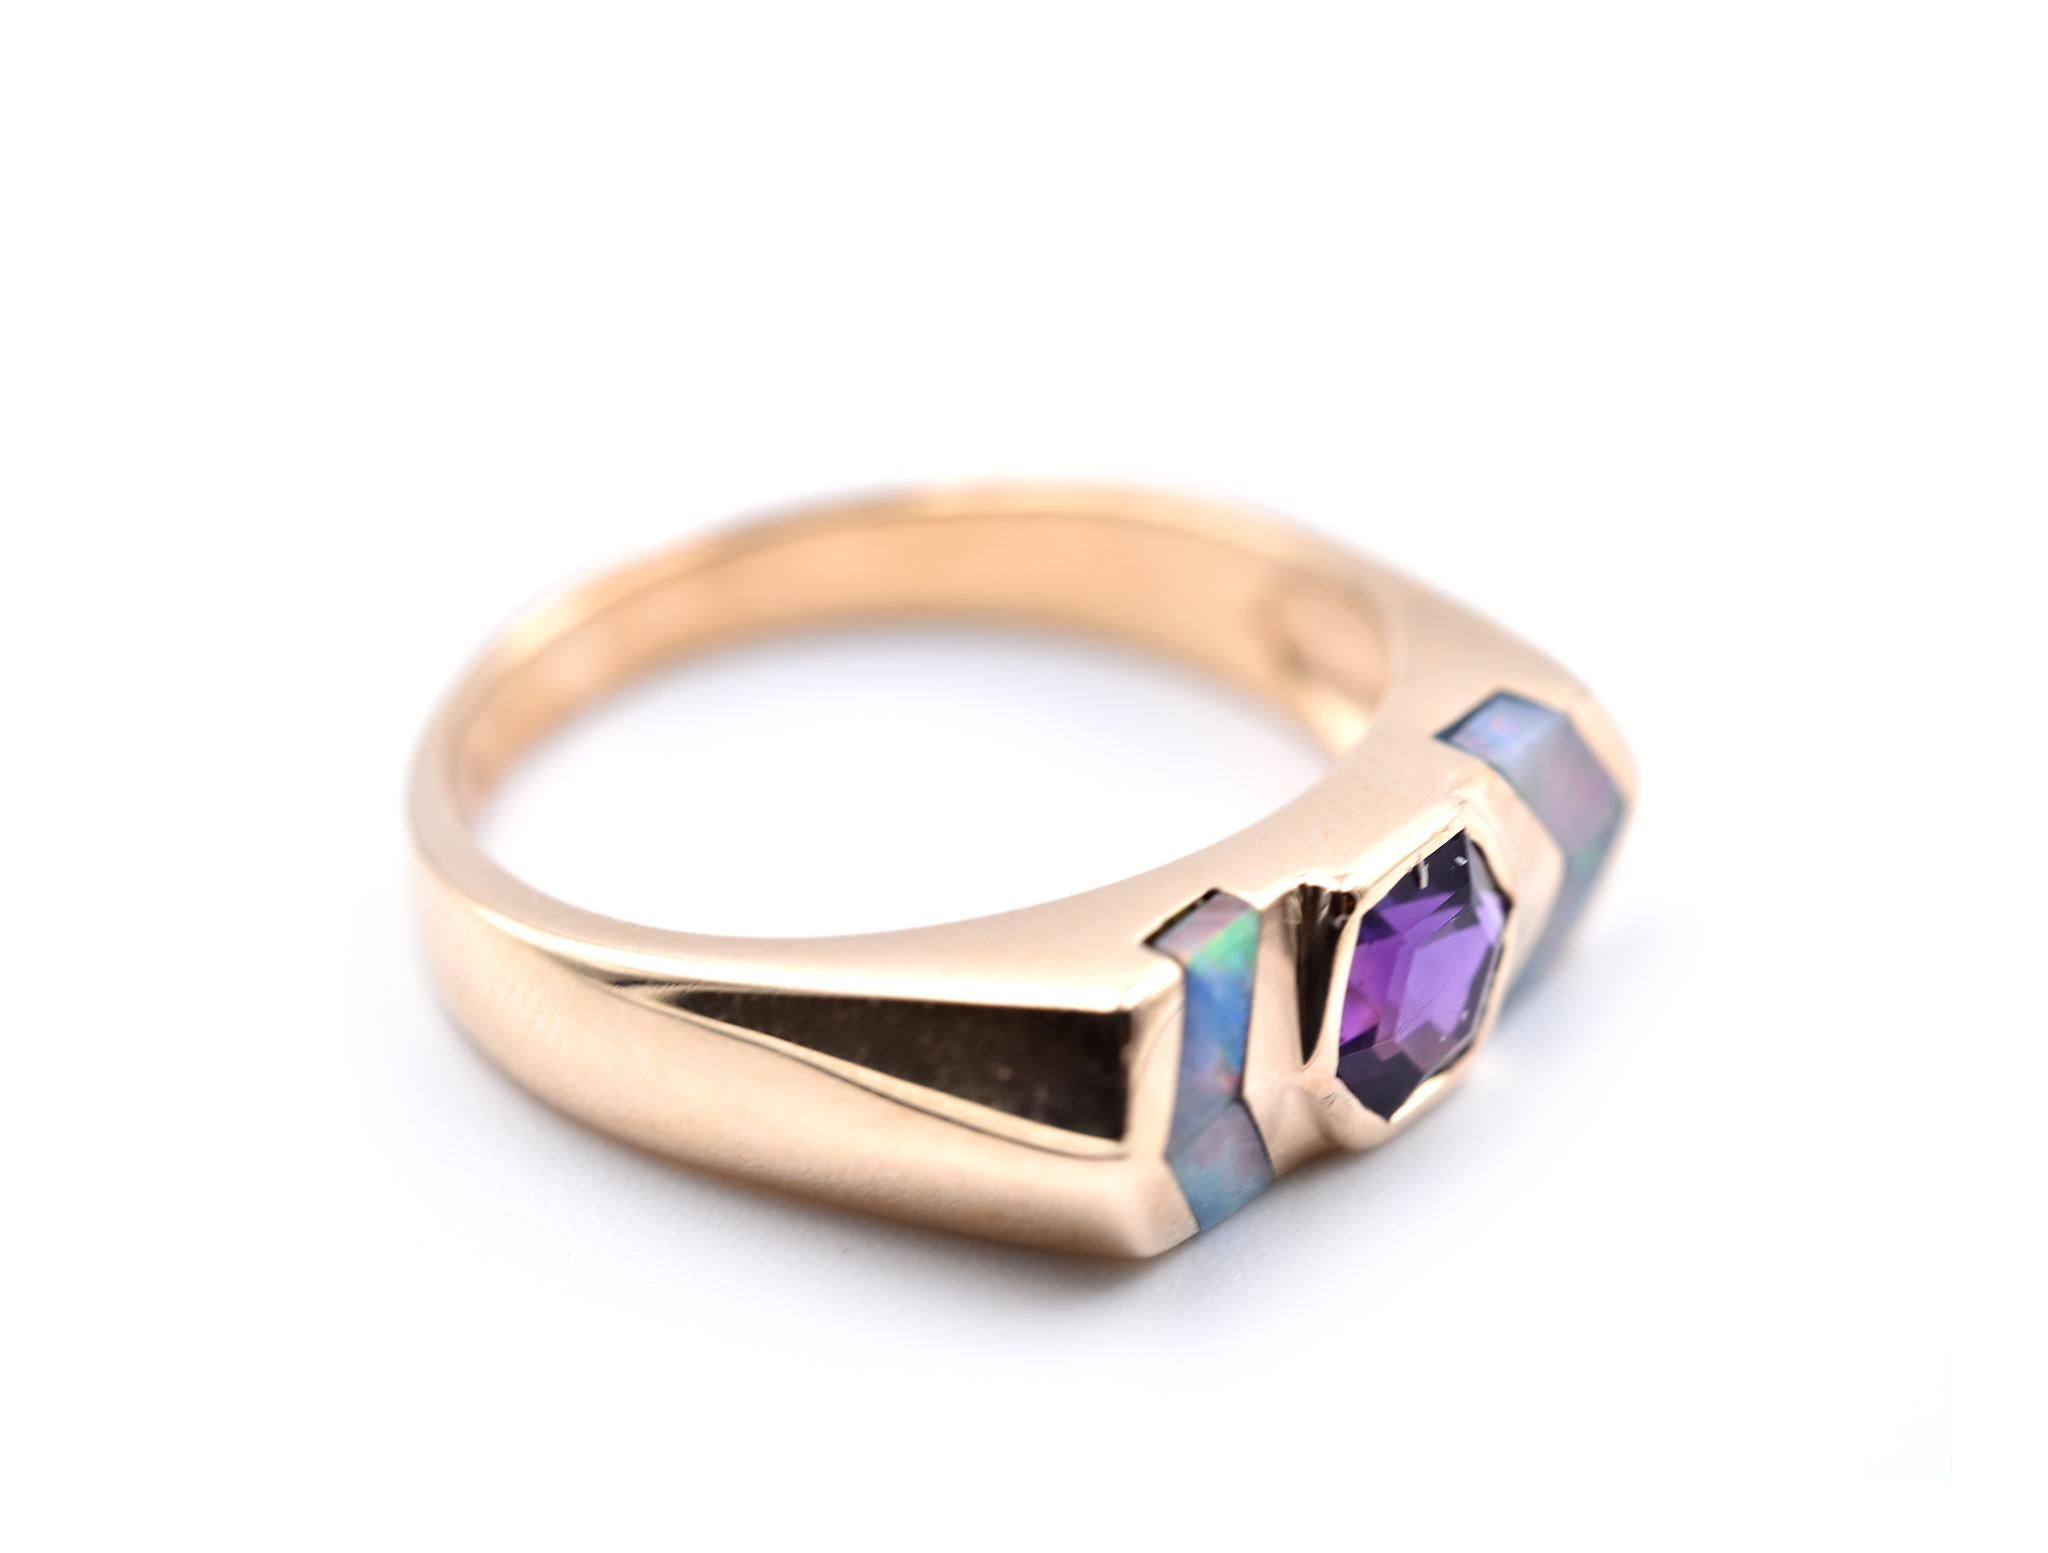 Designer: custom design
Material: 14k yellow gold
Ring size: 7 ¾ (please allow two additional shipping days for sizing requests)
Dimensions: ring is approximately 16.17mm by 17.00mm
Weight: 5.12 grams
